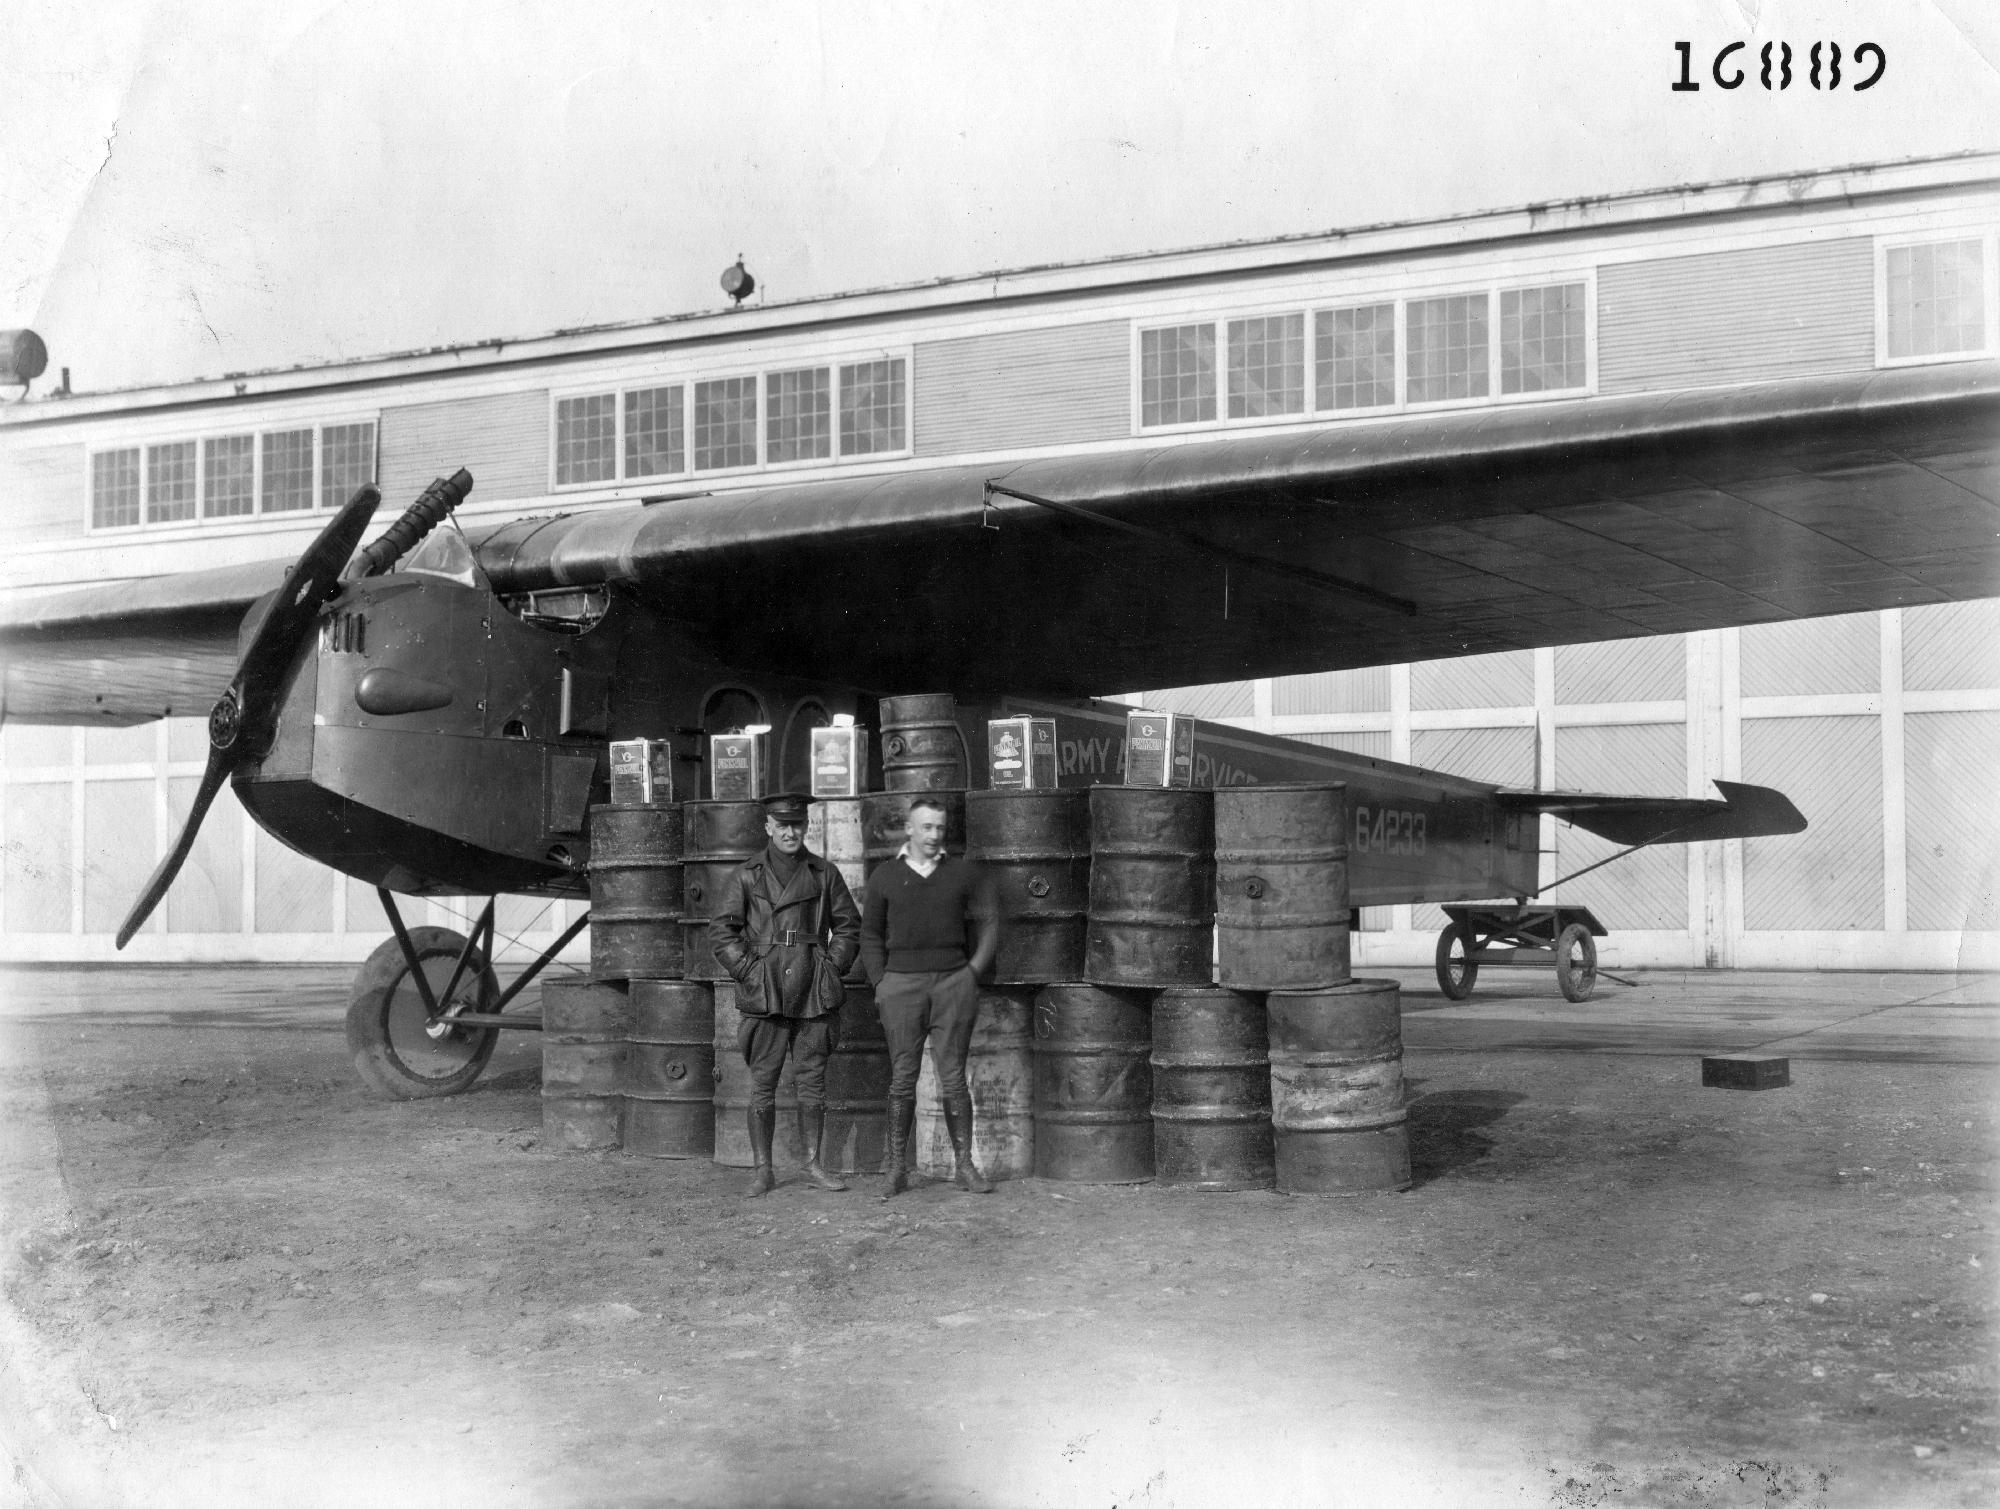 Lieutenants John Macready and Oakley Kelly with Fokker T-2, A.S. 64233. The fuel barrels and containers represent the fuel required for the airplane to cross the content non-stop. (San Diego Air and Space Museum)